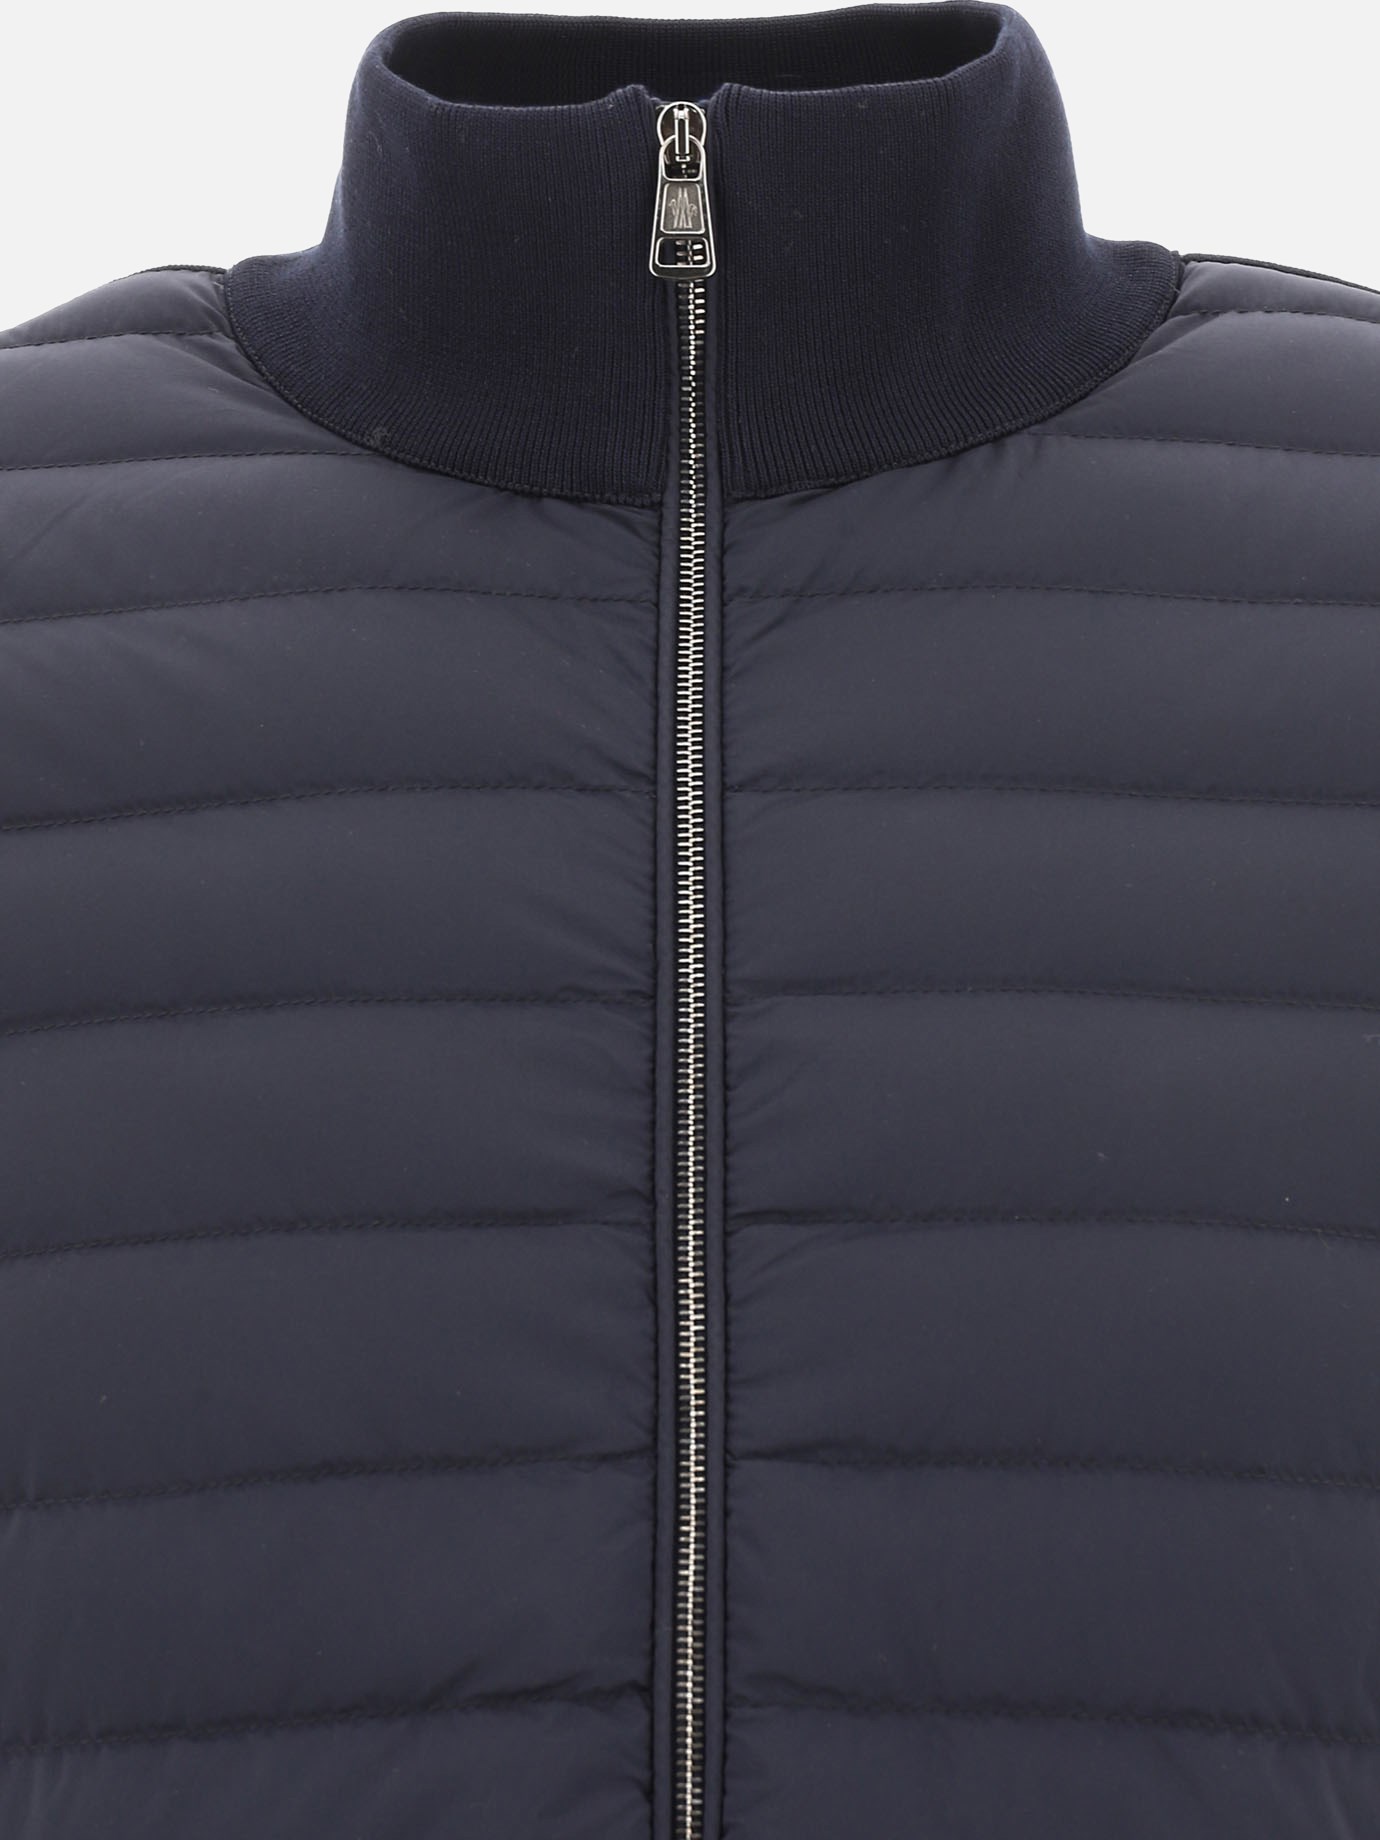 Tricot down jacket by Moncler